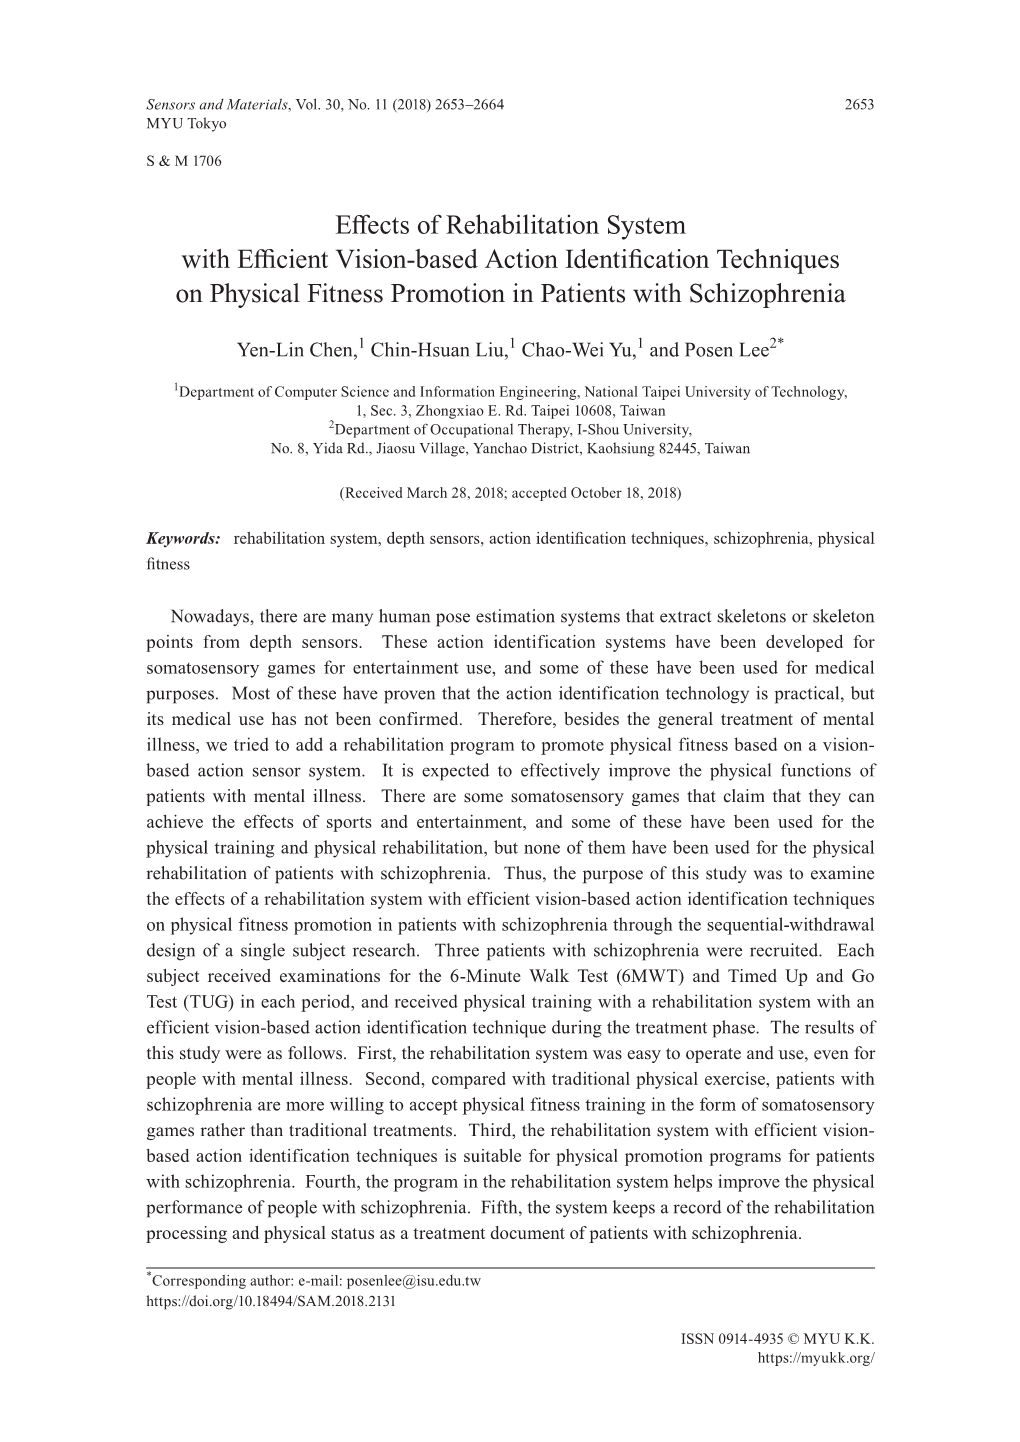 Effects of Rehabilitation System with Efficient Vision-Based Action Identification Techniques on Physical Fitness Promotion in Patients with Schizophrenia